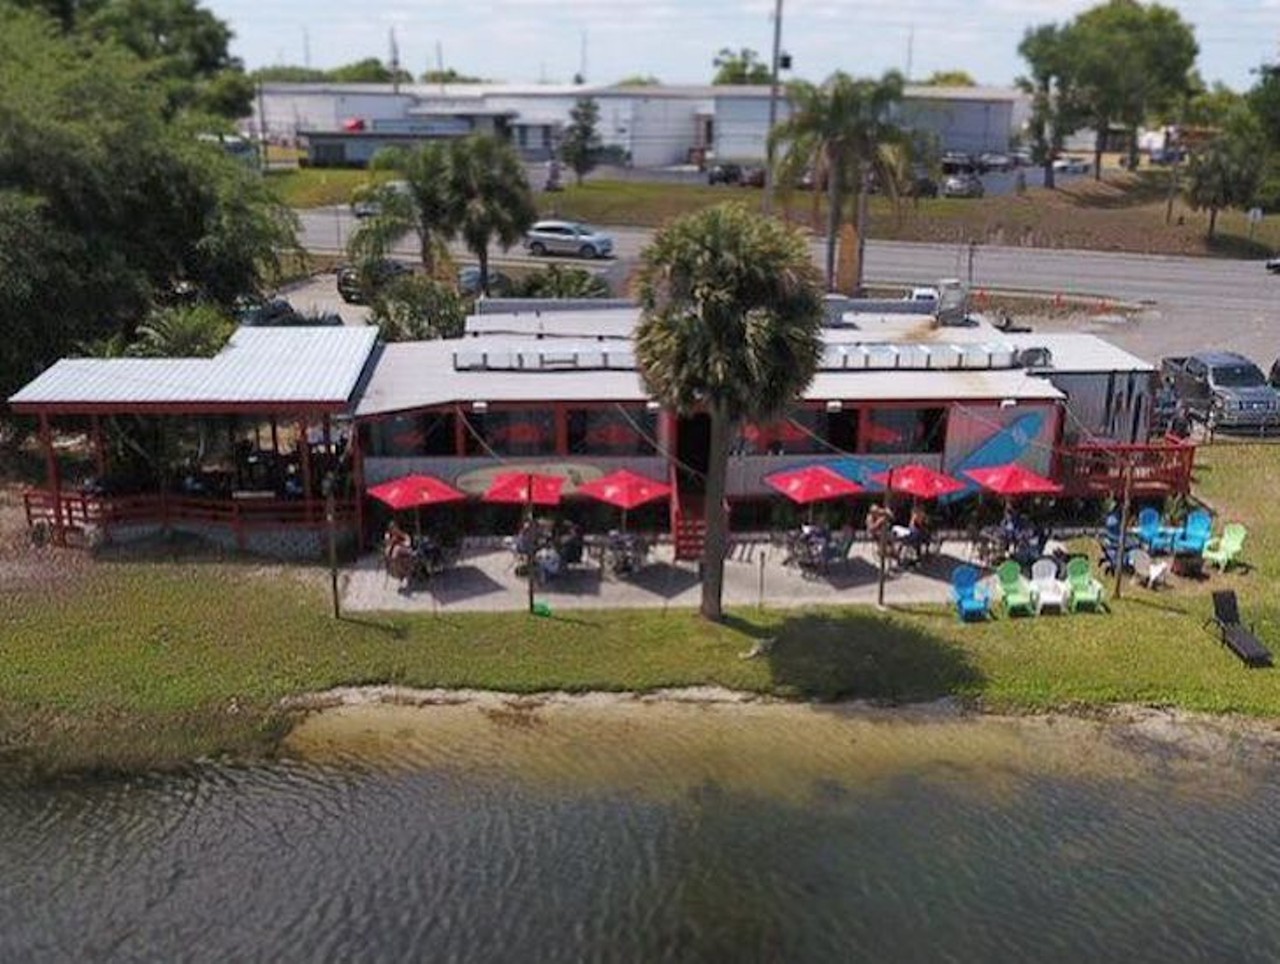 The Waterfront  
4201 S. Orange Ave., 407-866-0468
The best place in the neighborhood to grab a drink and some food lakeside. Make sure to try their boozy slushies, including the Moscow Mule slushie.
Photo via Facebook